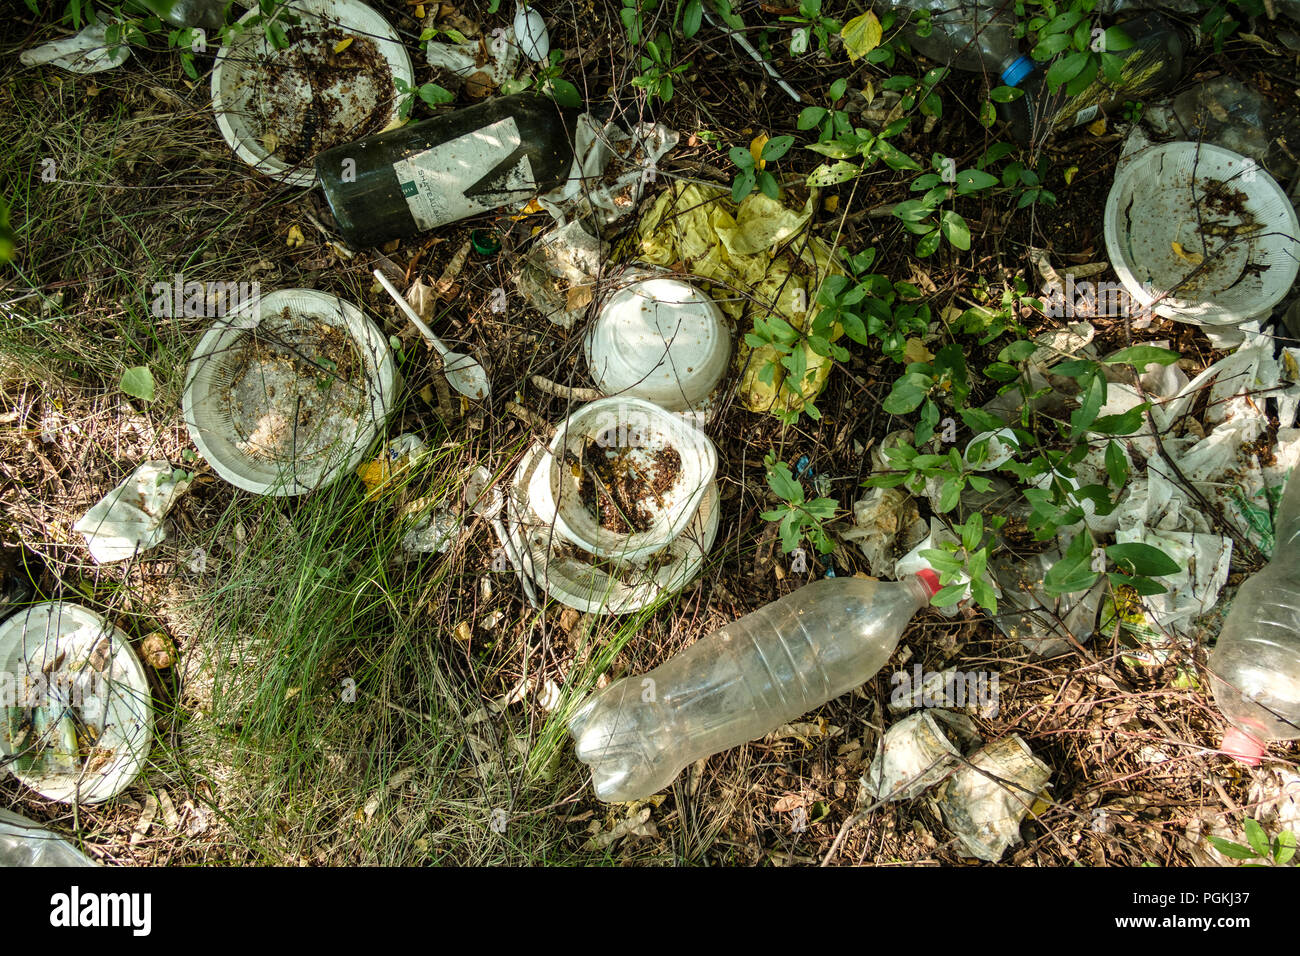 Plastic garbage on nature grows grass. Plastic tableware. Stock Photo